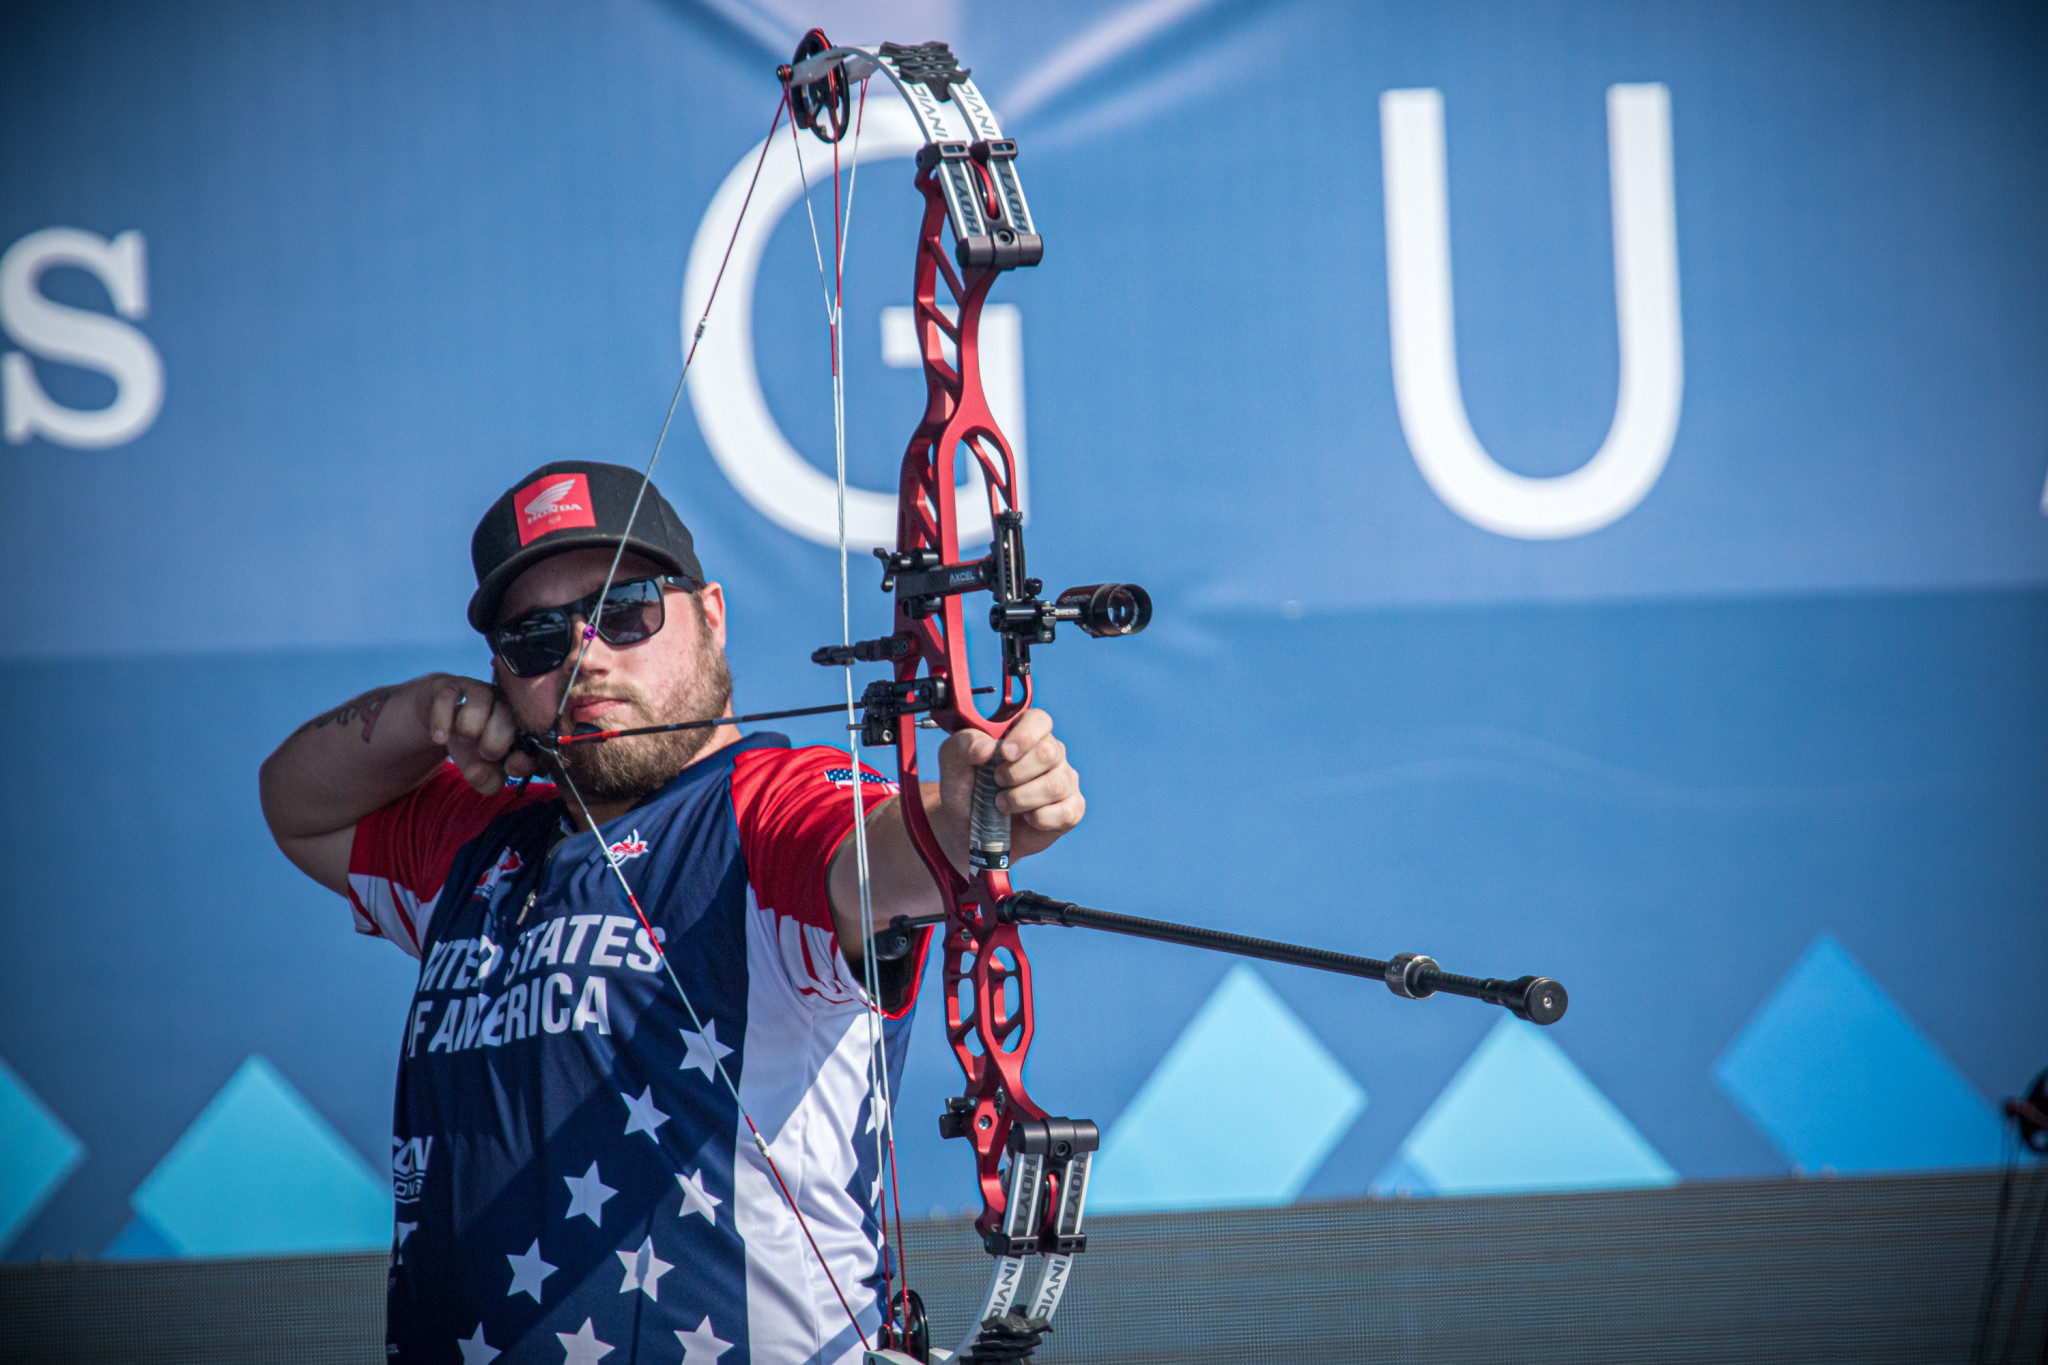 Schaff has Archery World Cup results disqualified over failed drugs test but faces no ban 